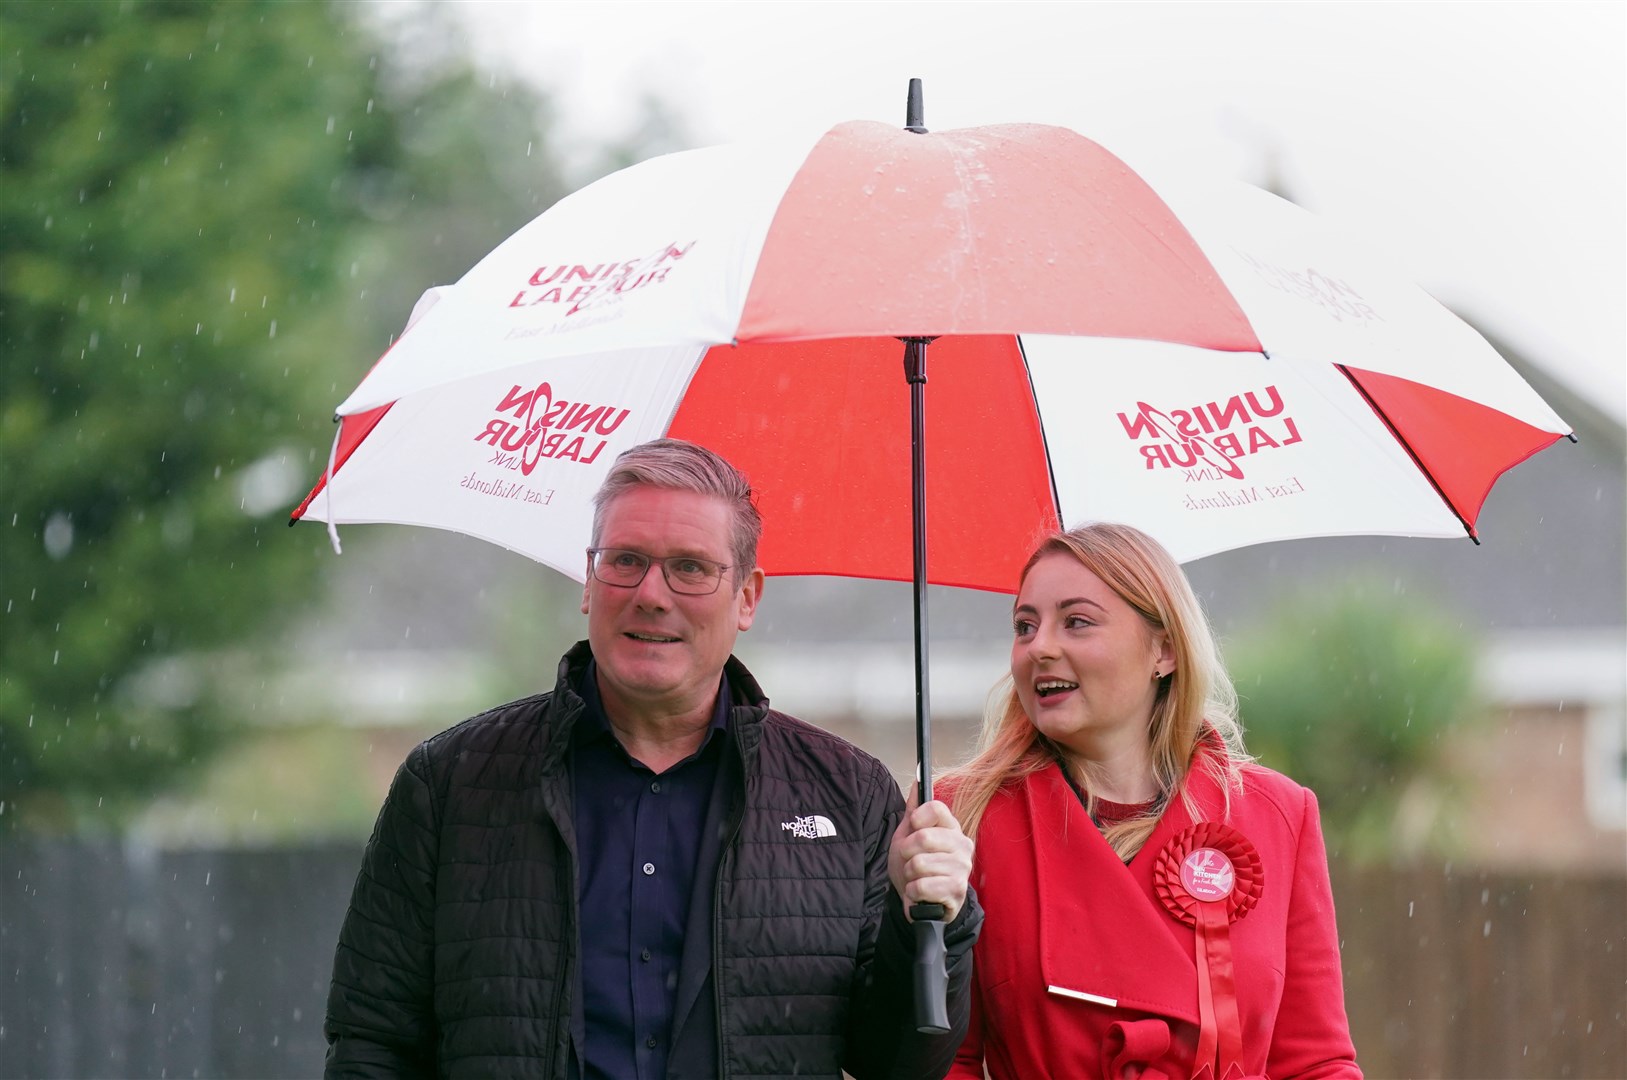 Labour leader Sir Keir Starmer on the campaign trail with Gen Kitchen, the party’s candidate in the Wellingborough by-election (Joe Giddens/PA)